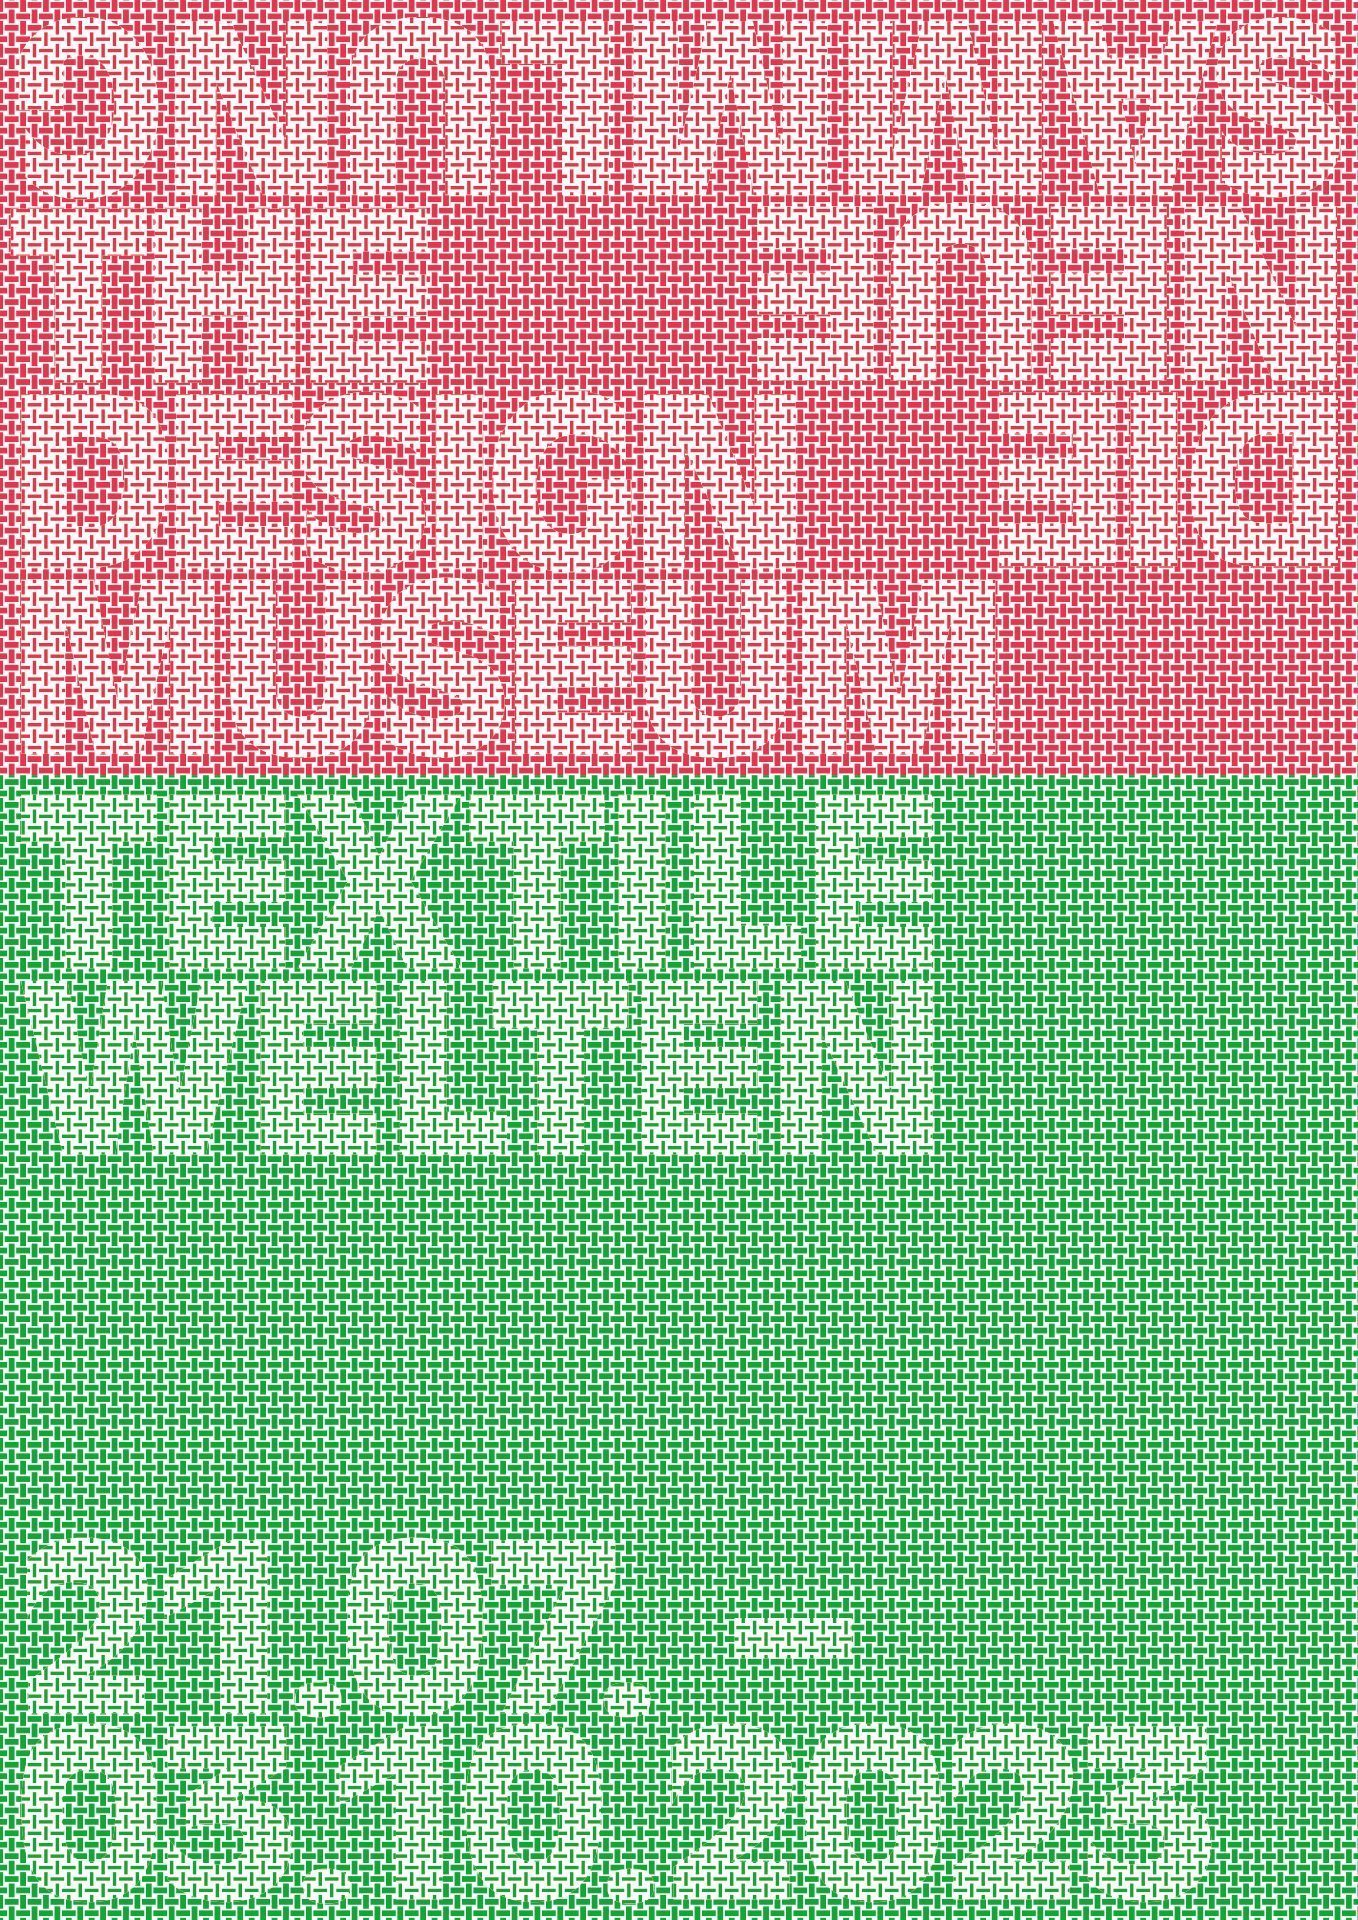 The red logo of Die Neue Sammlung. Below it is the title and exhibition period against a green background. The entire poster is covered with a textile woven pattern.